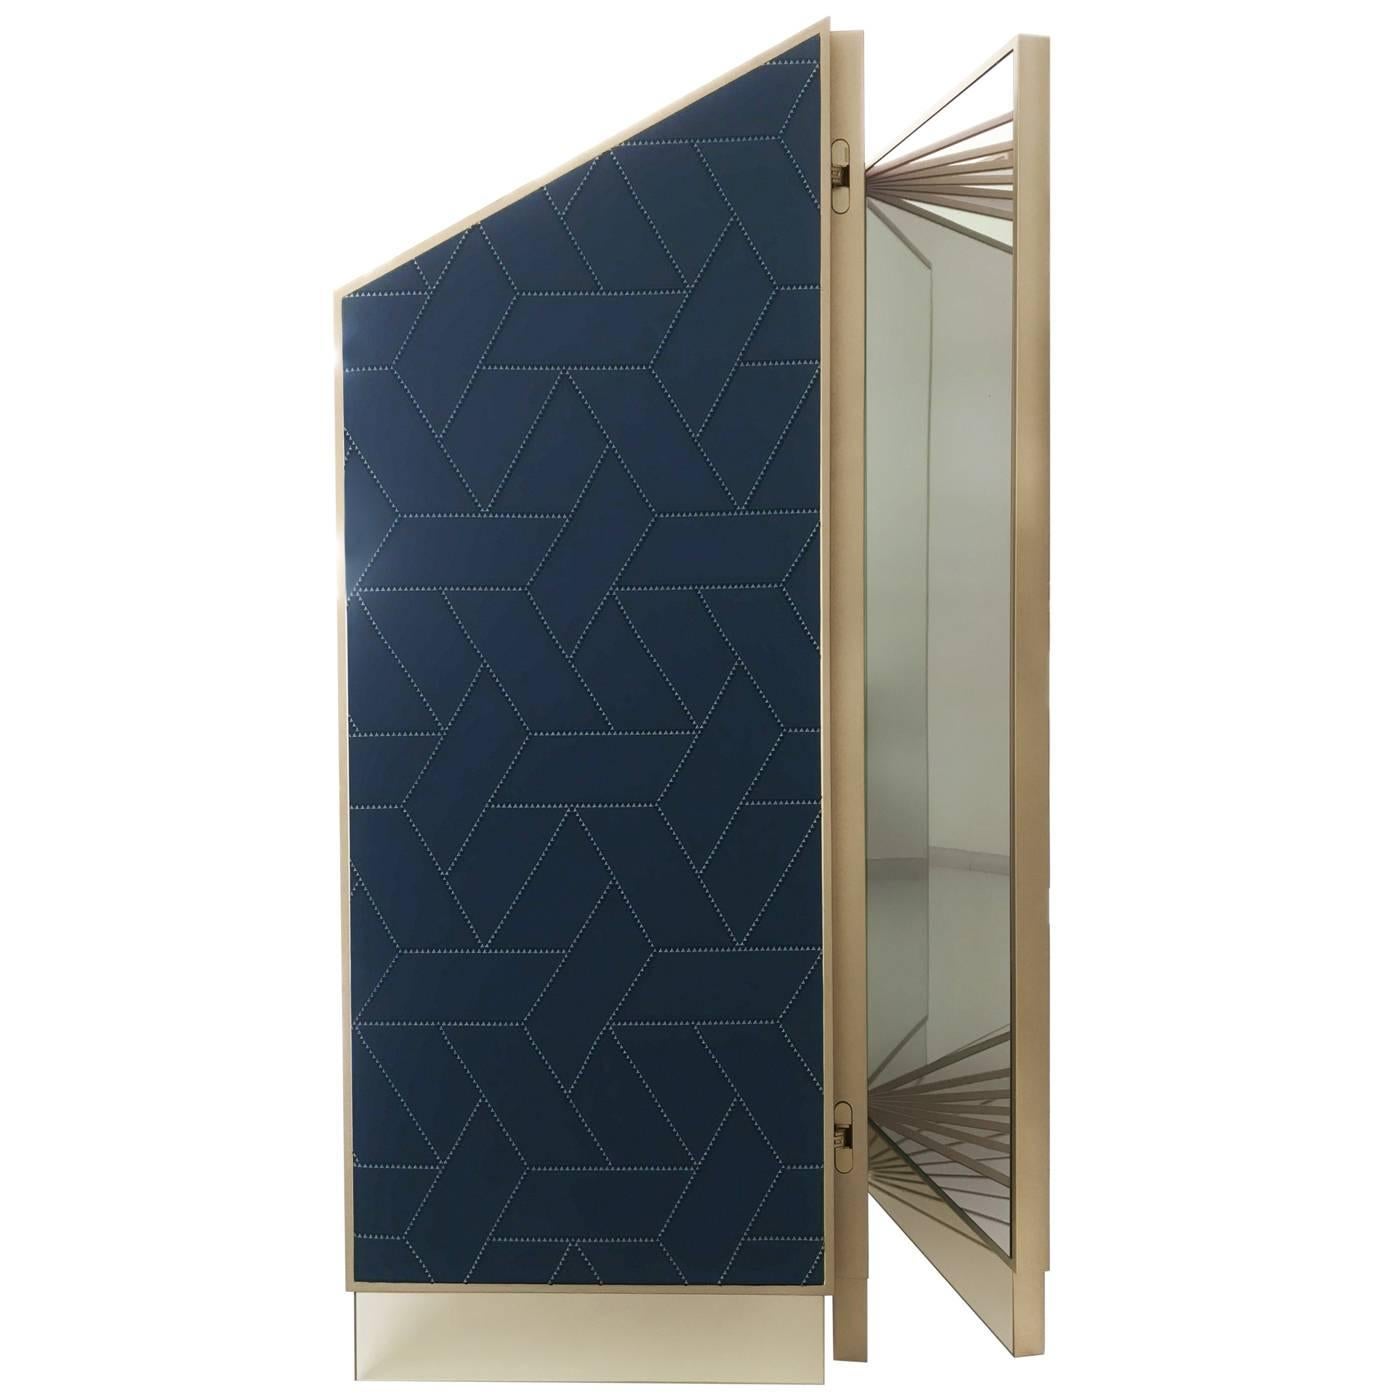 This magnificent screen is inspired by the elegant style of Art Deco, with its reflective surfaces, bold Silhouette, and the geometric patterns of its decor. The metal bushed brass frame rests on a base in mirror with a light silver finish. The